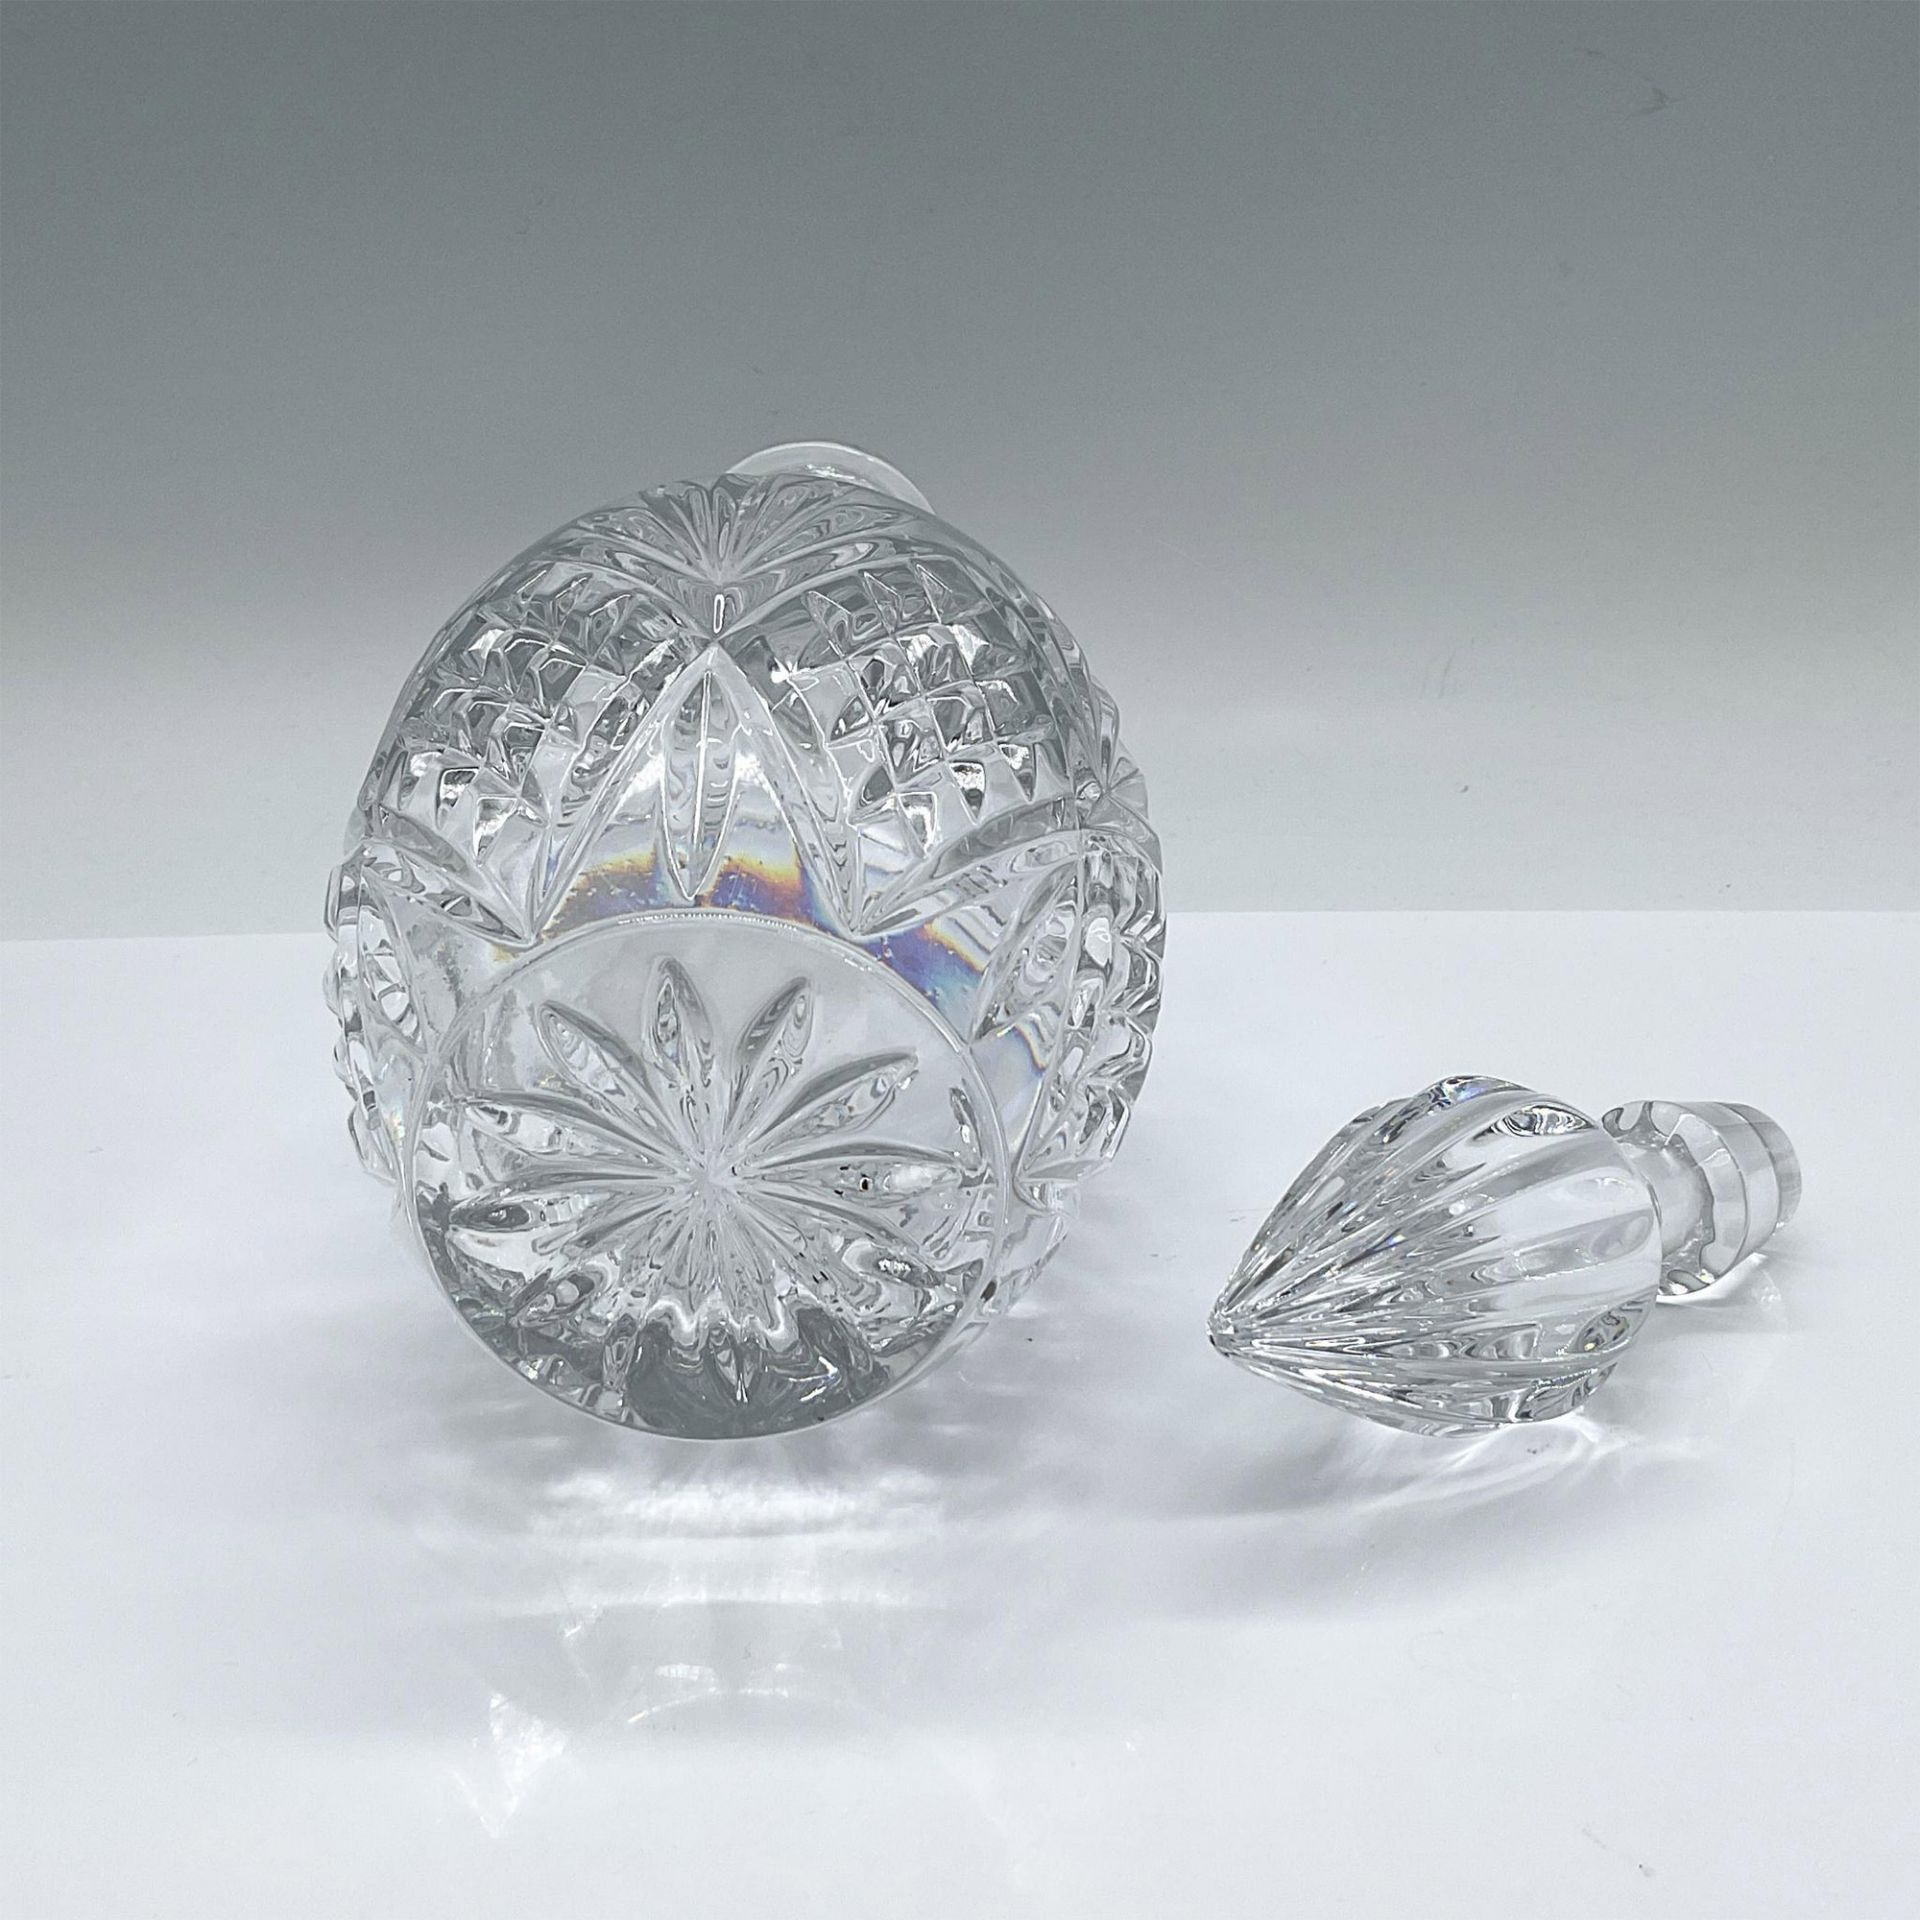 Shannon Crystal Cordial Decanter with Stopper, Dublin - Image 3 of 3